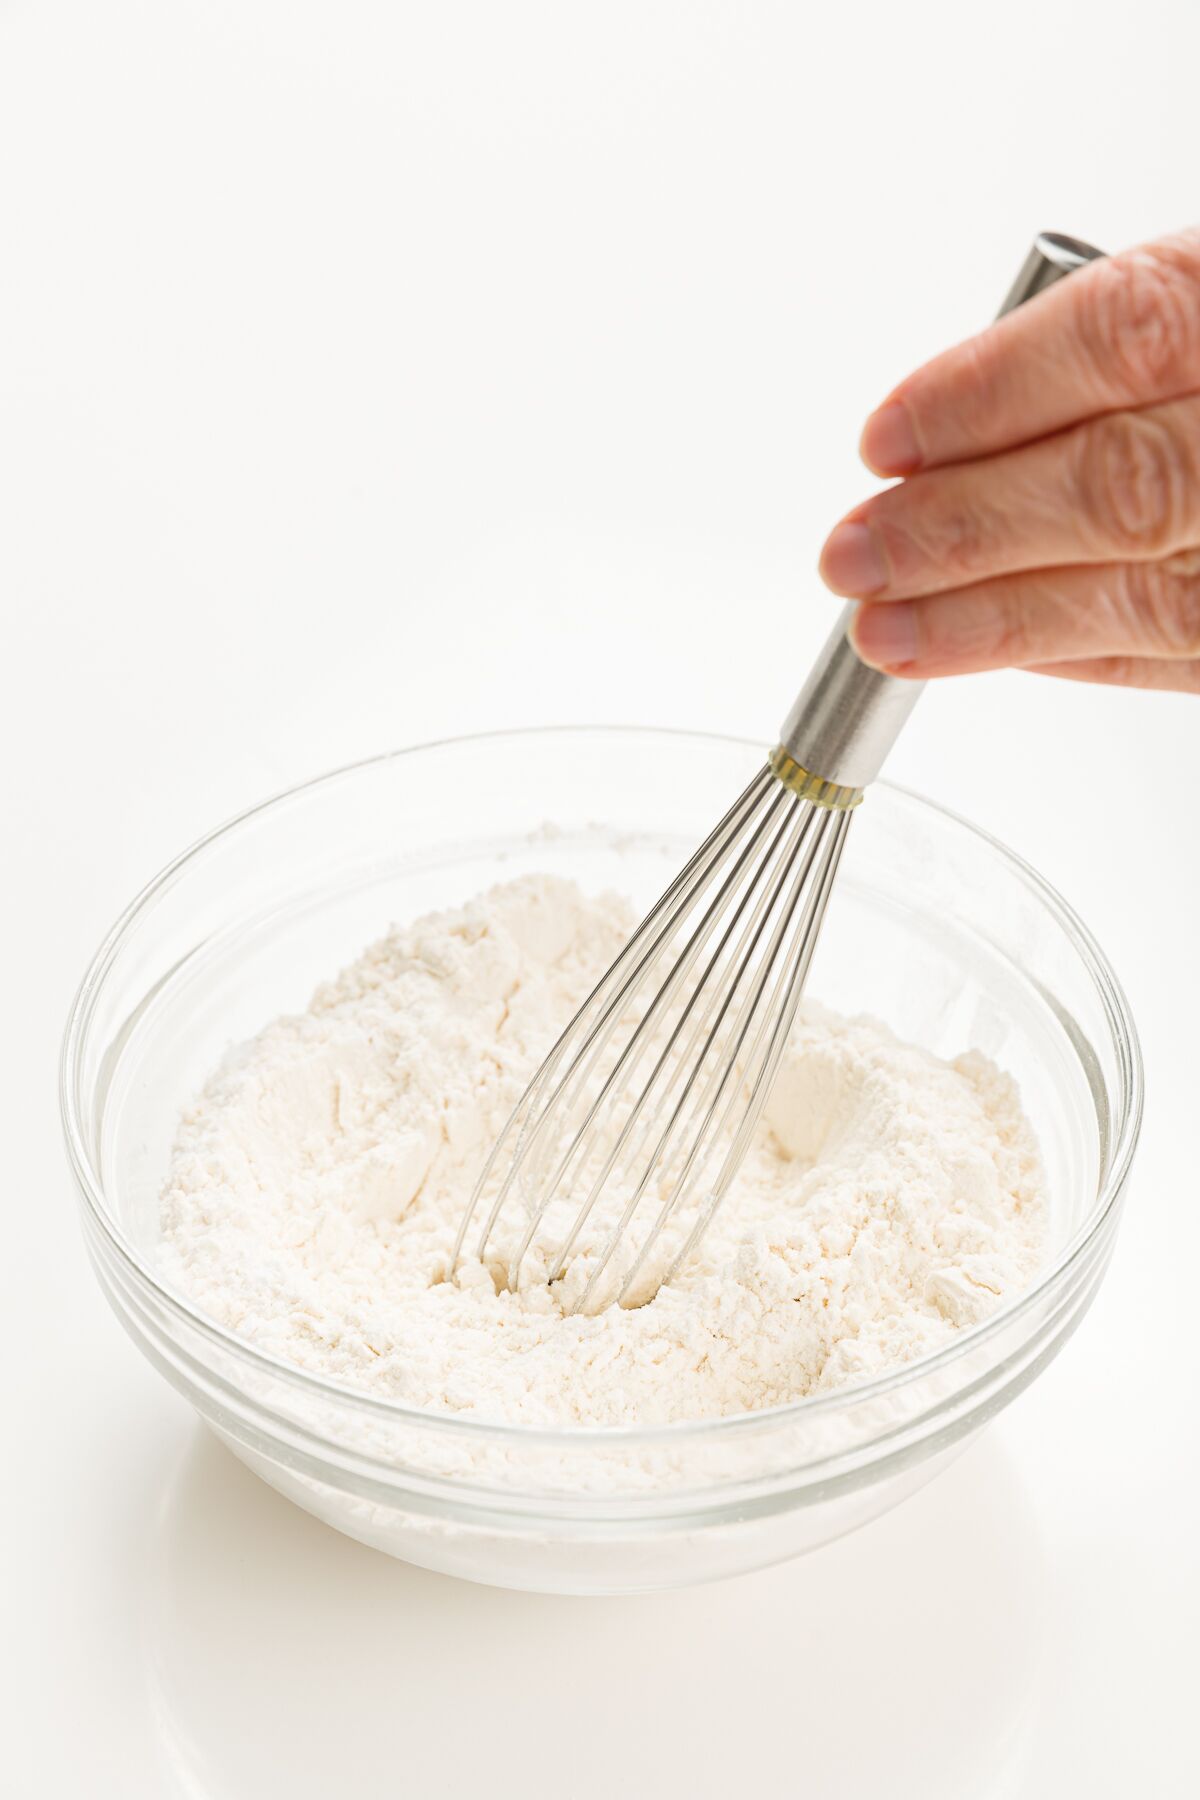 Hand holding whisk mixing up dry ingredients in a clear glass bowl